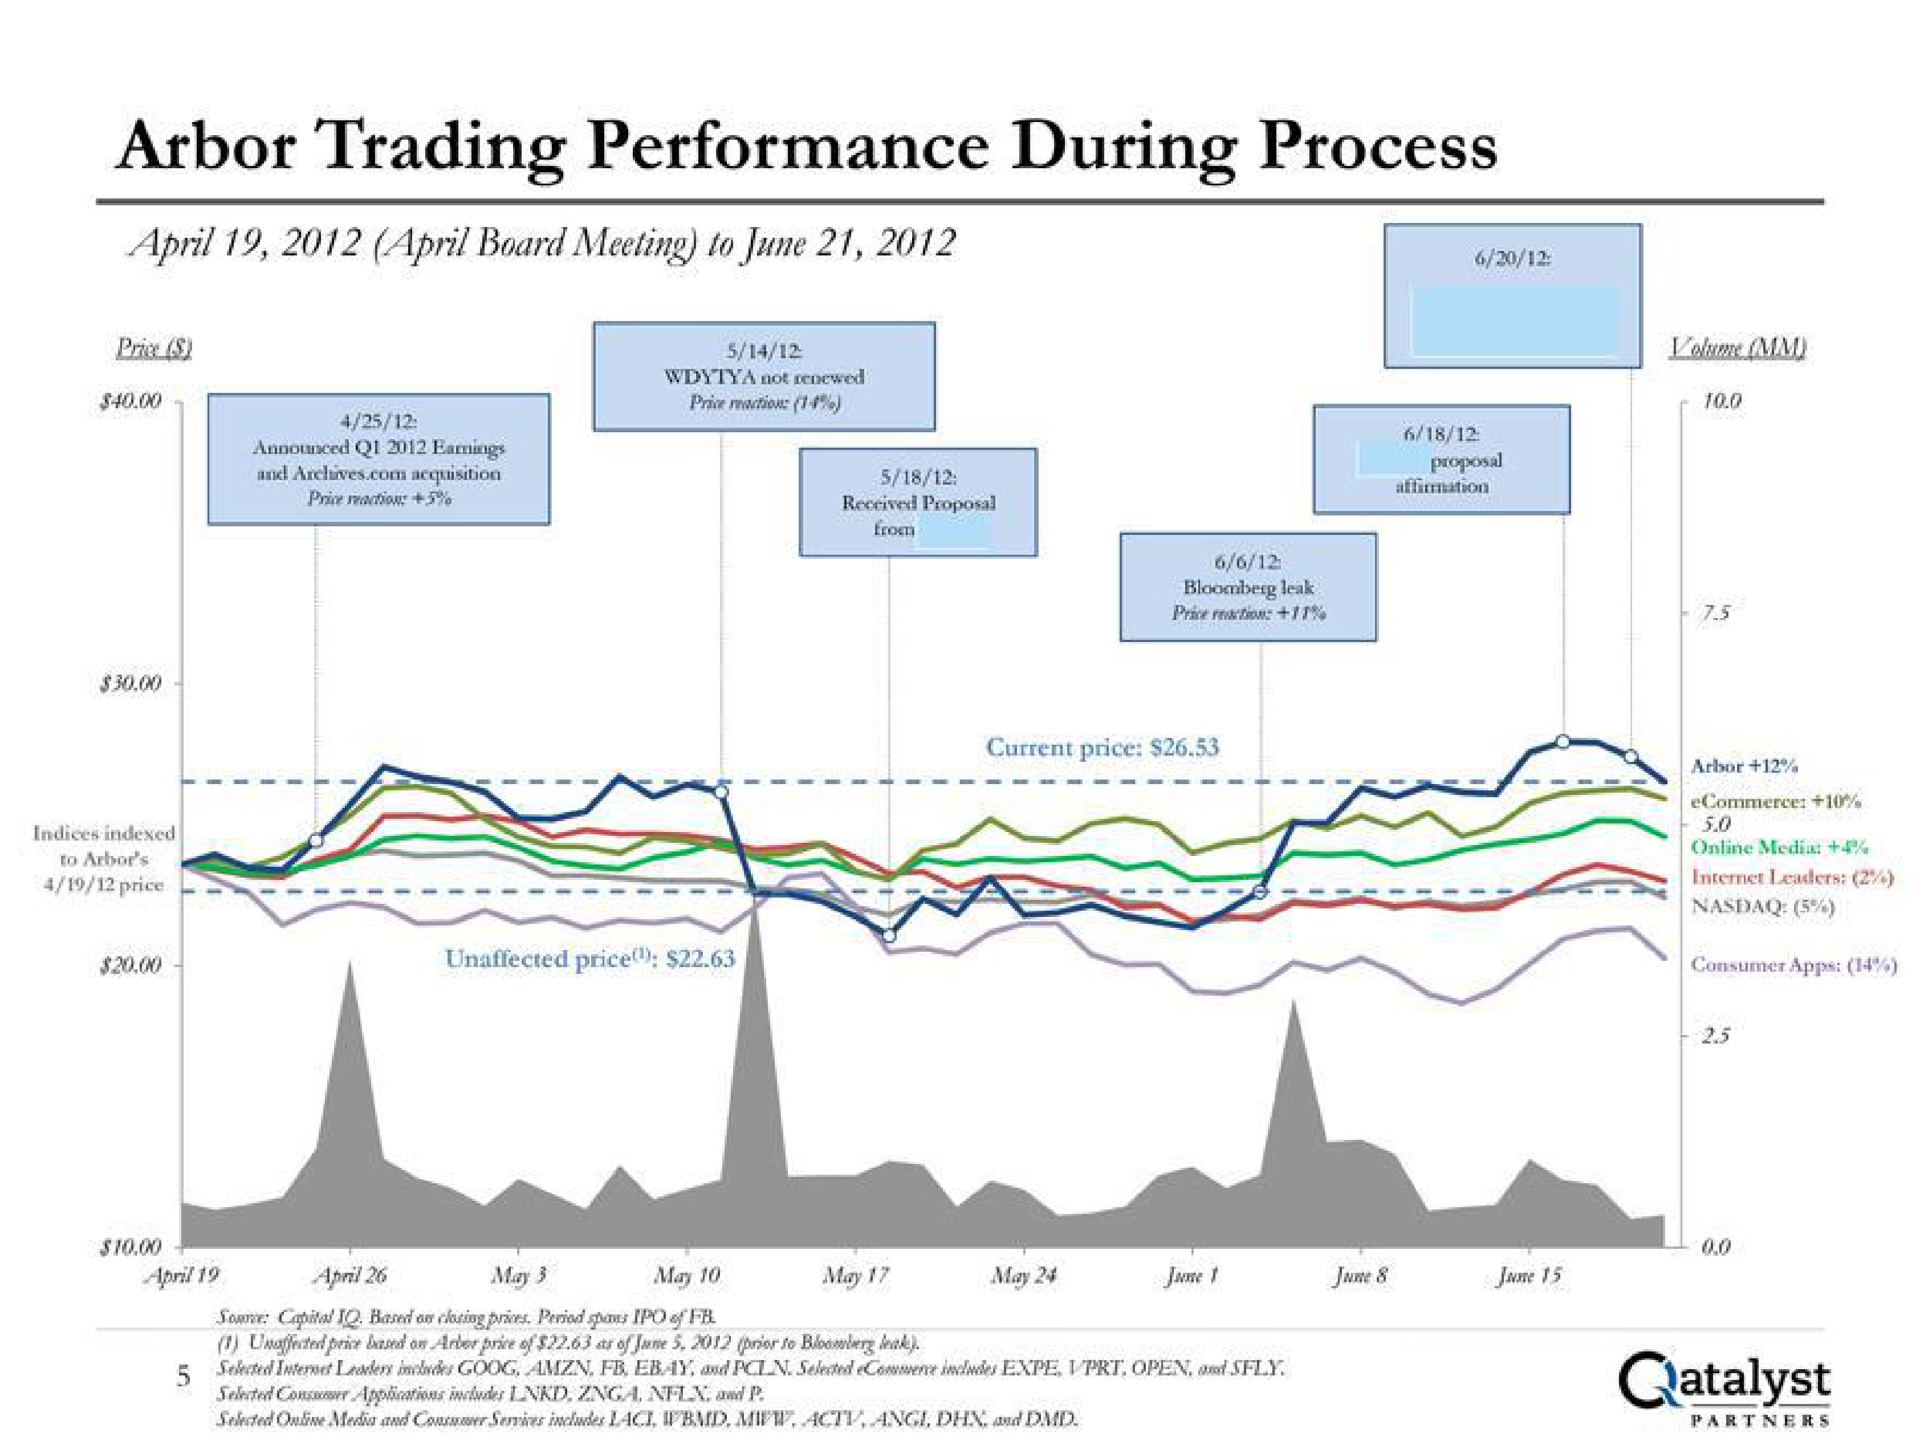 arbor trading performance during process board meeting to june sale mem | Qatalyst Partners